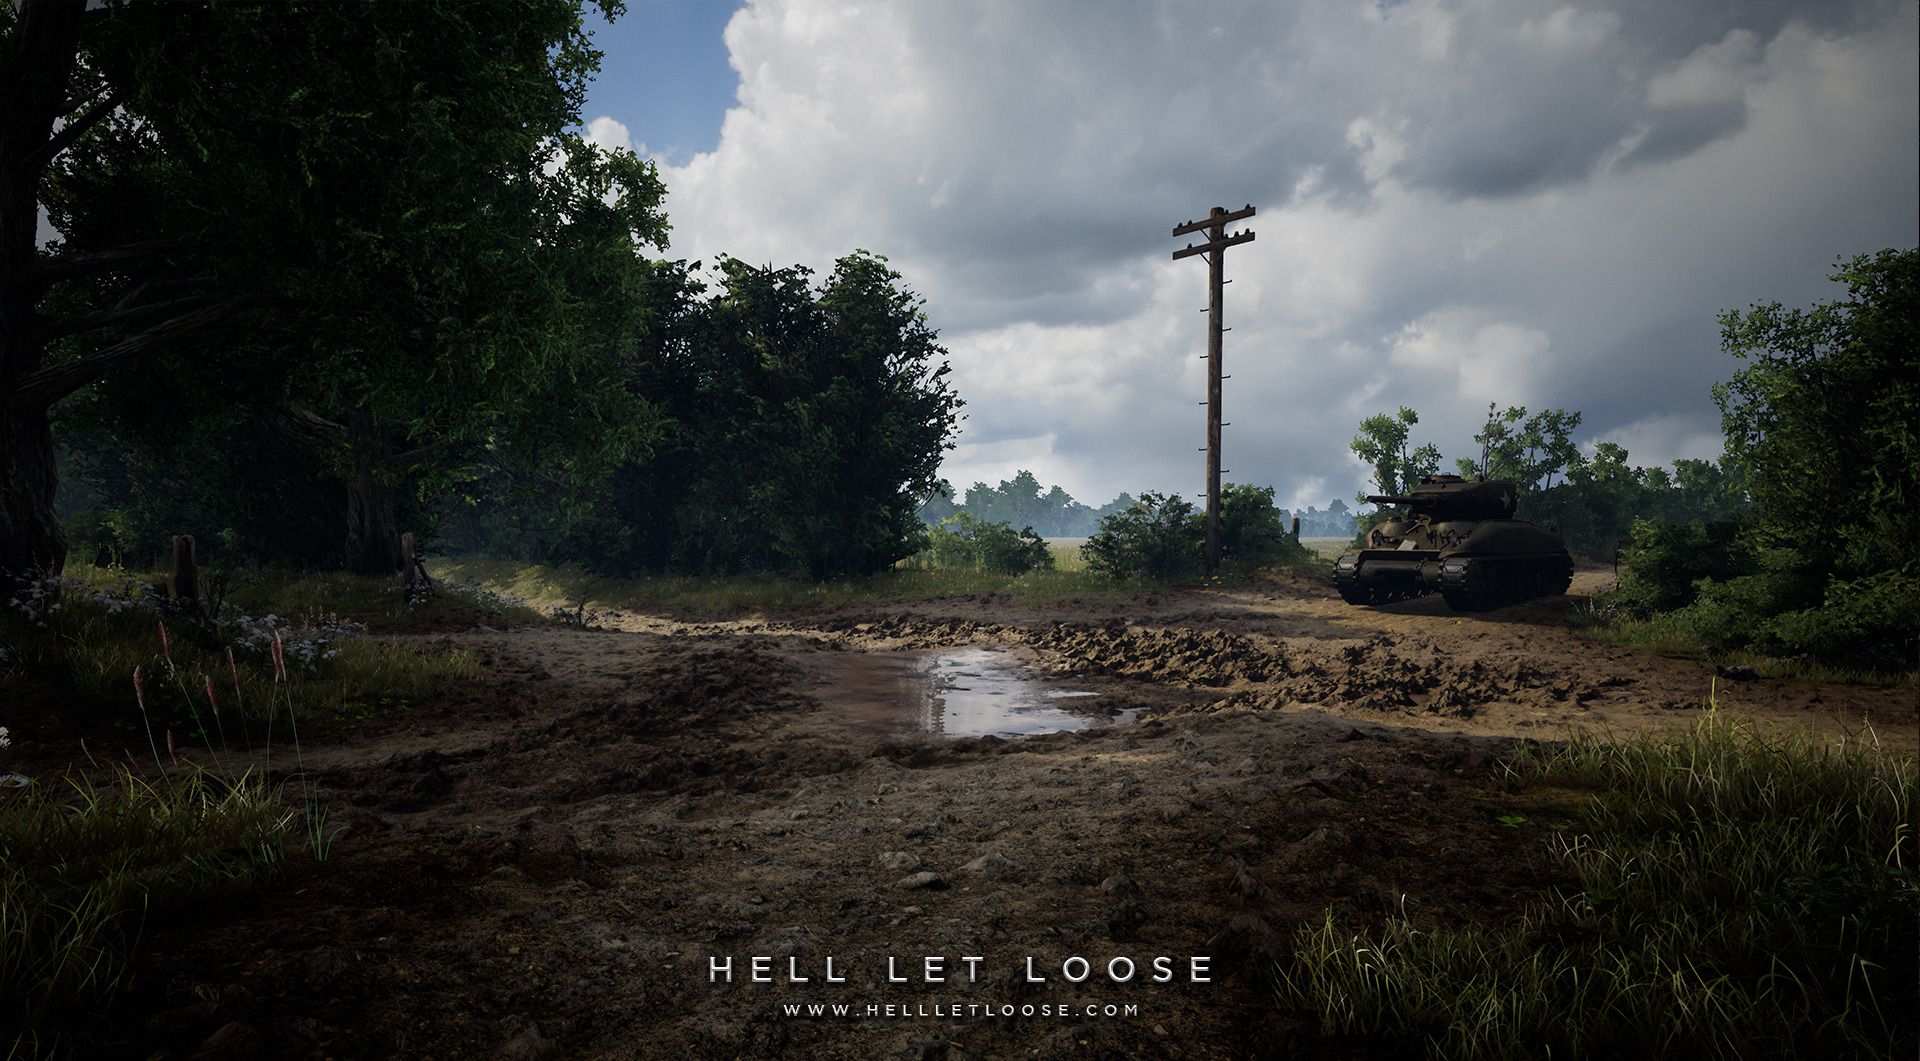 Hell Let Loose screenshots, image and .giantbomb.com